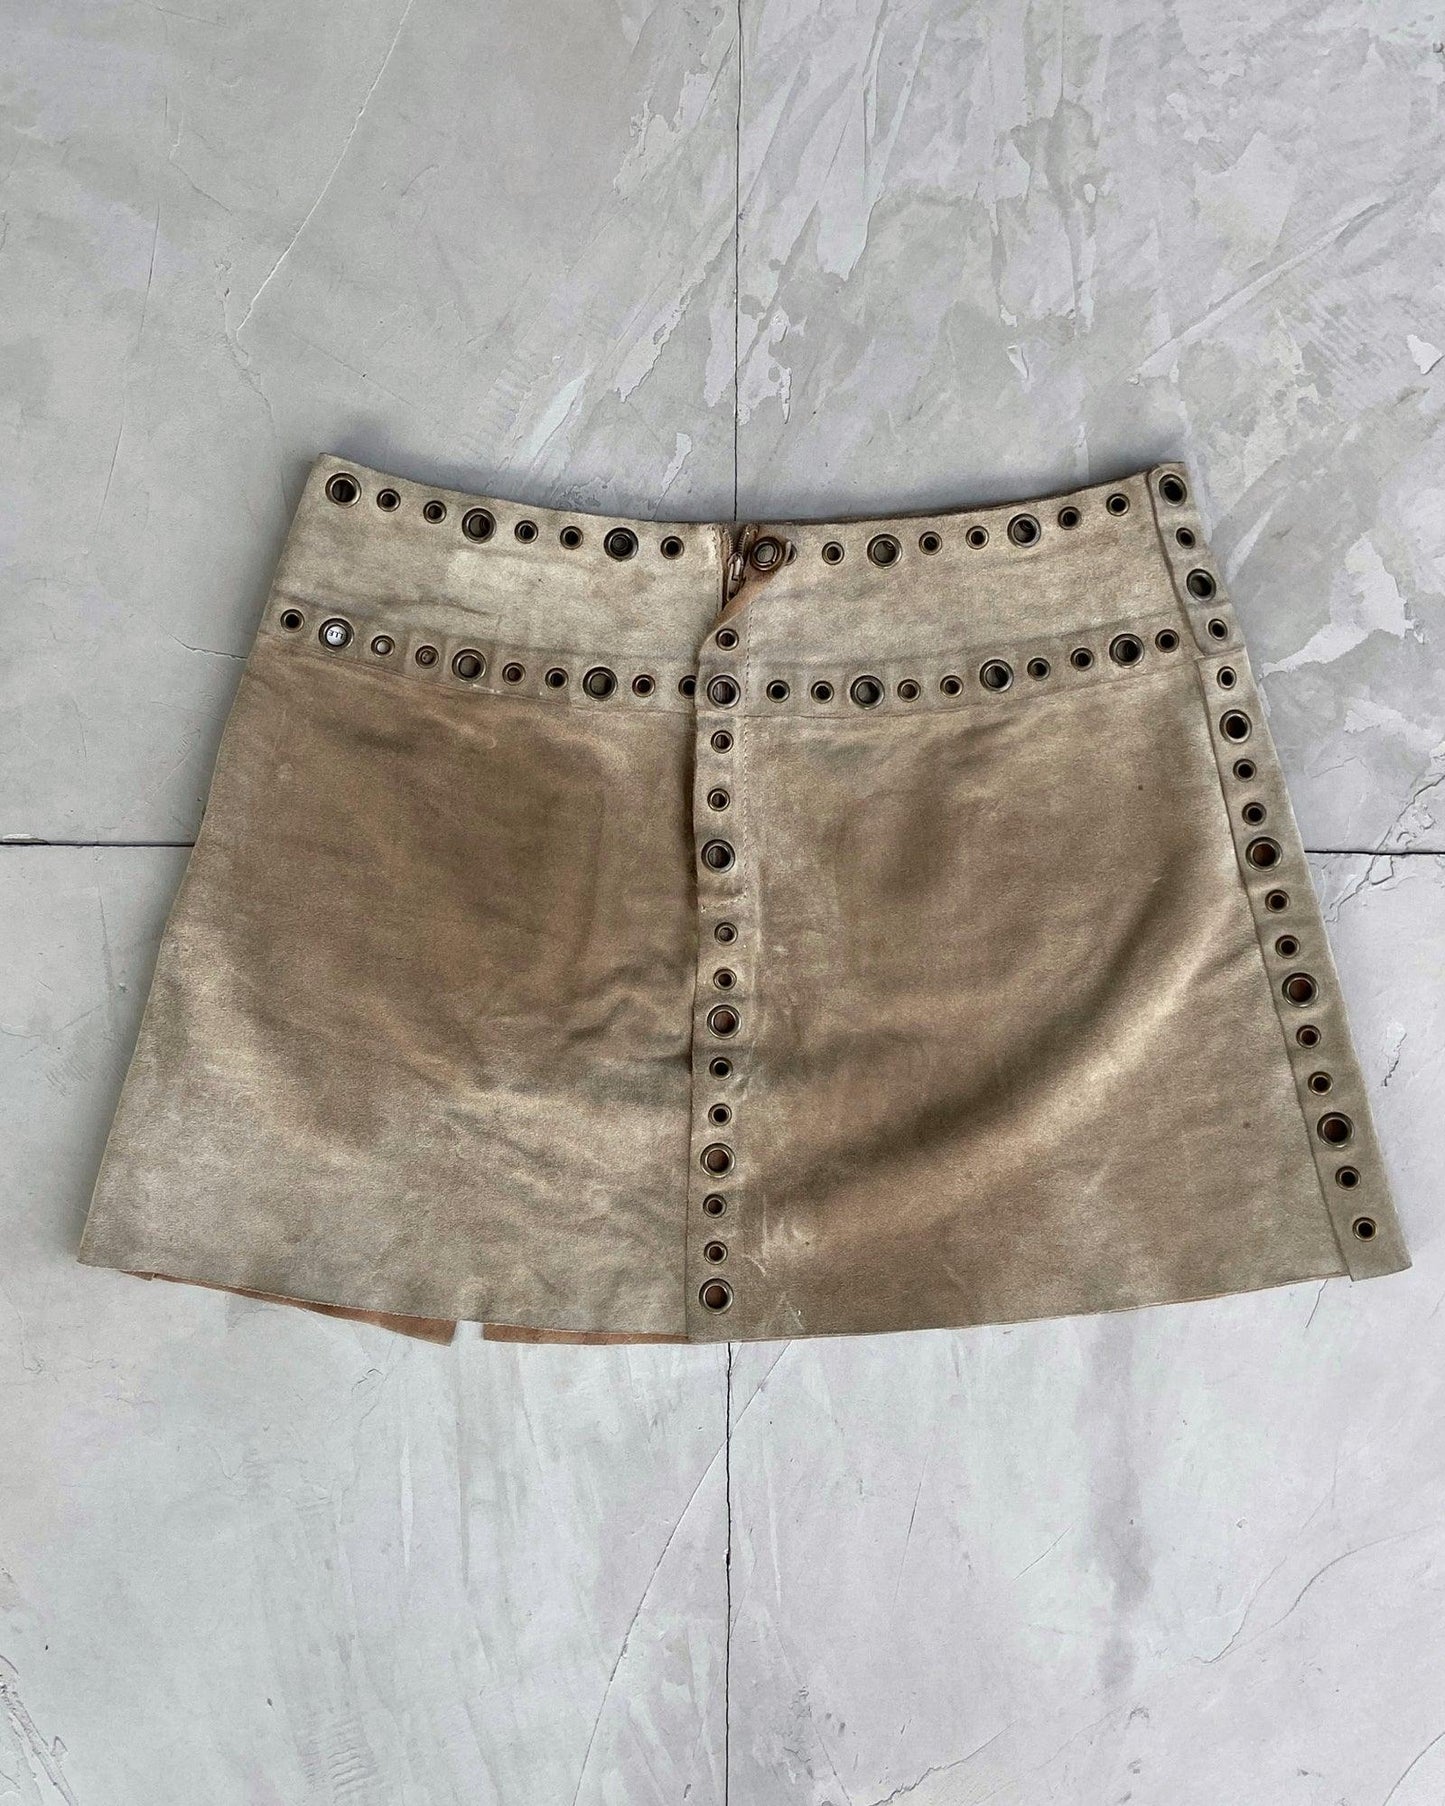 DOLCE & GABBANA D&G LEATHER EYELET MINI SKIRT - S/M - Known Source